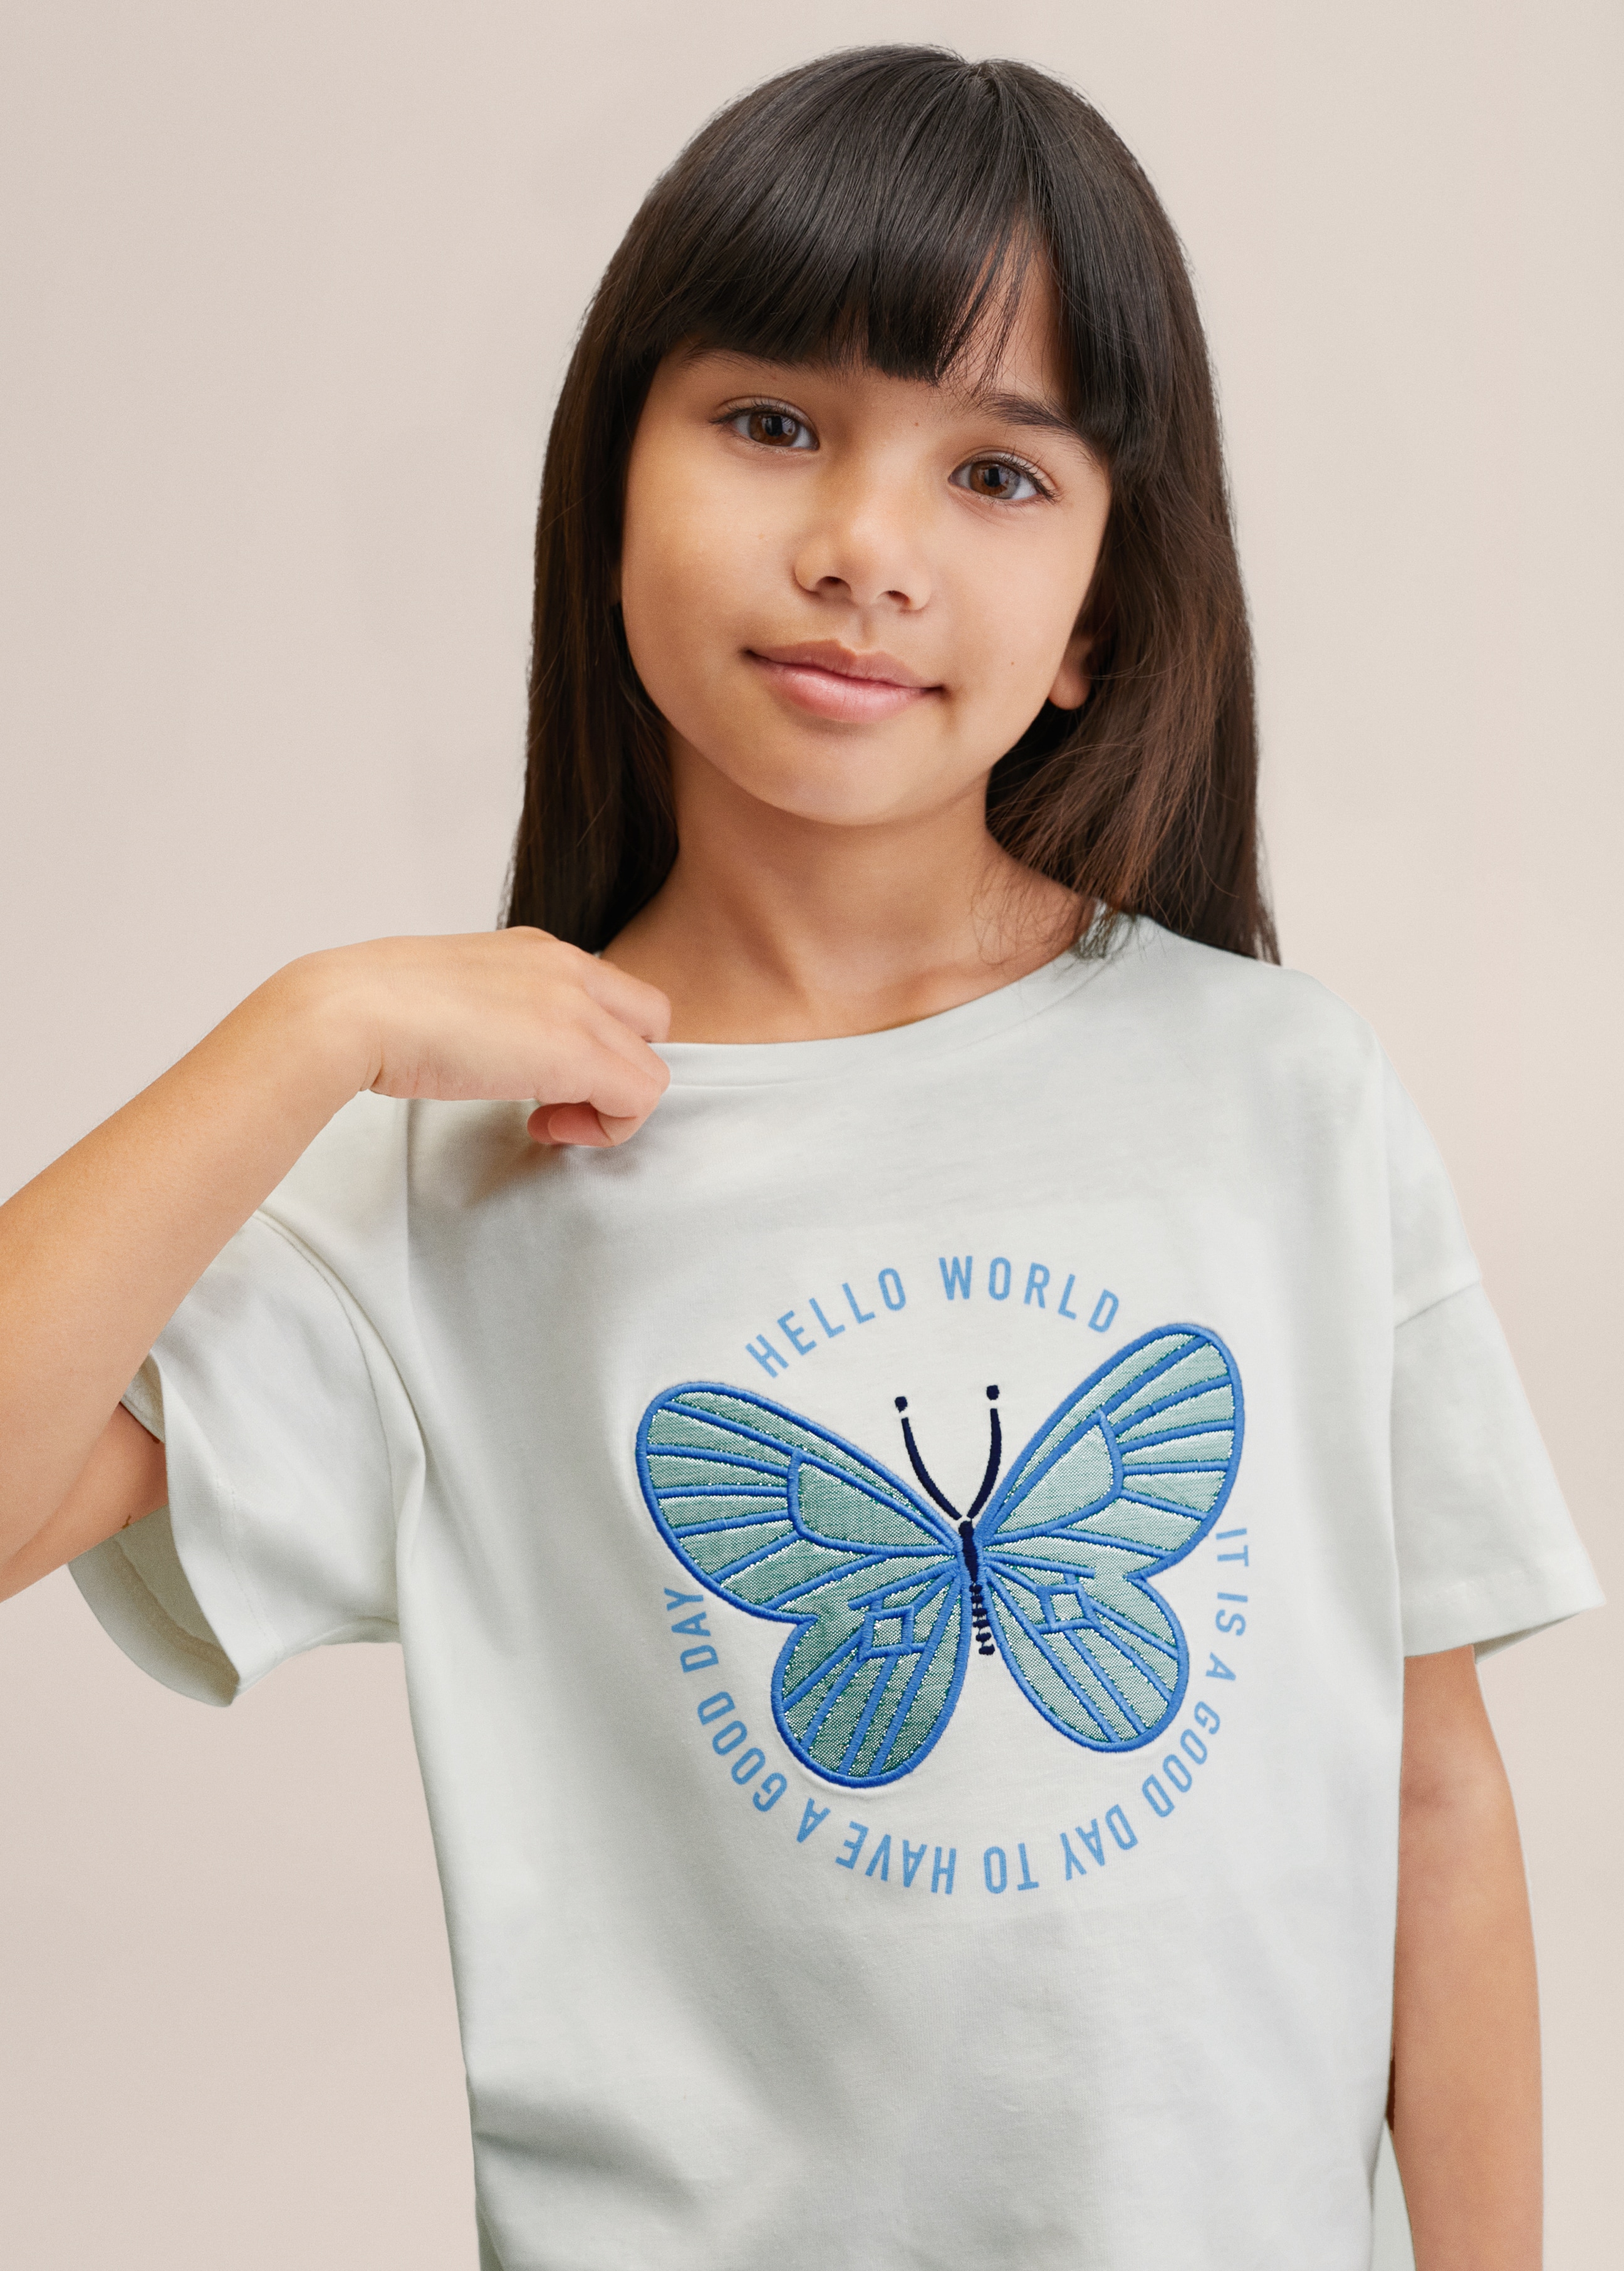 Embroidered butterfly t-shirt - Medium plane